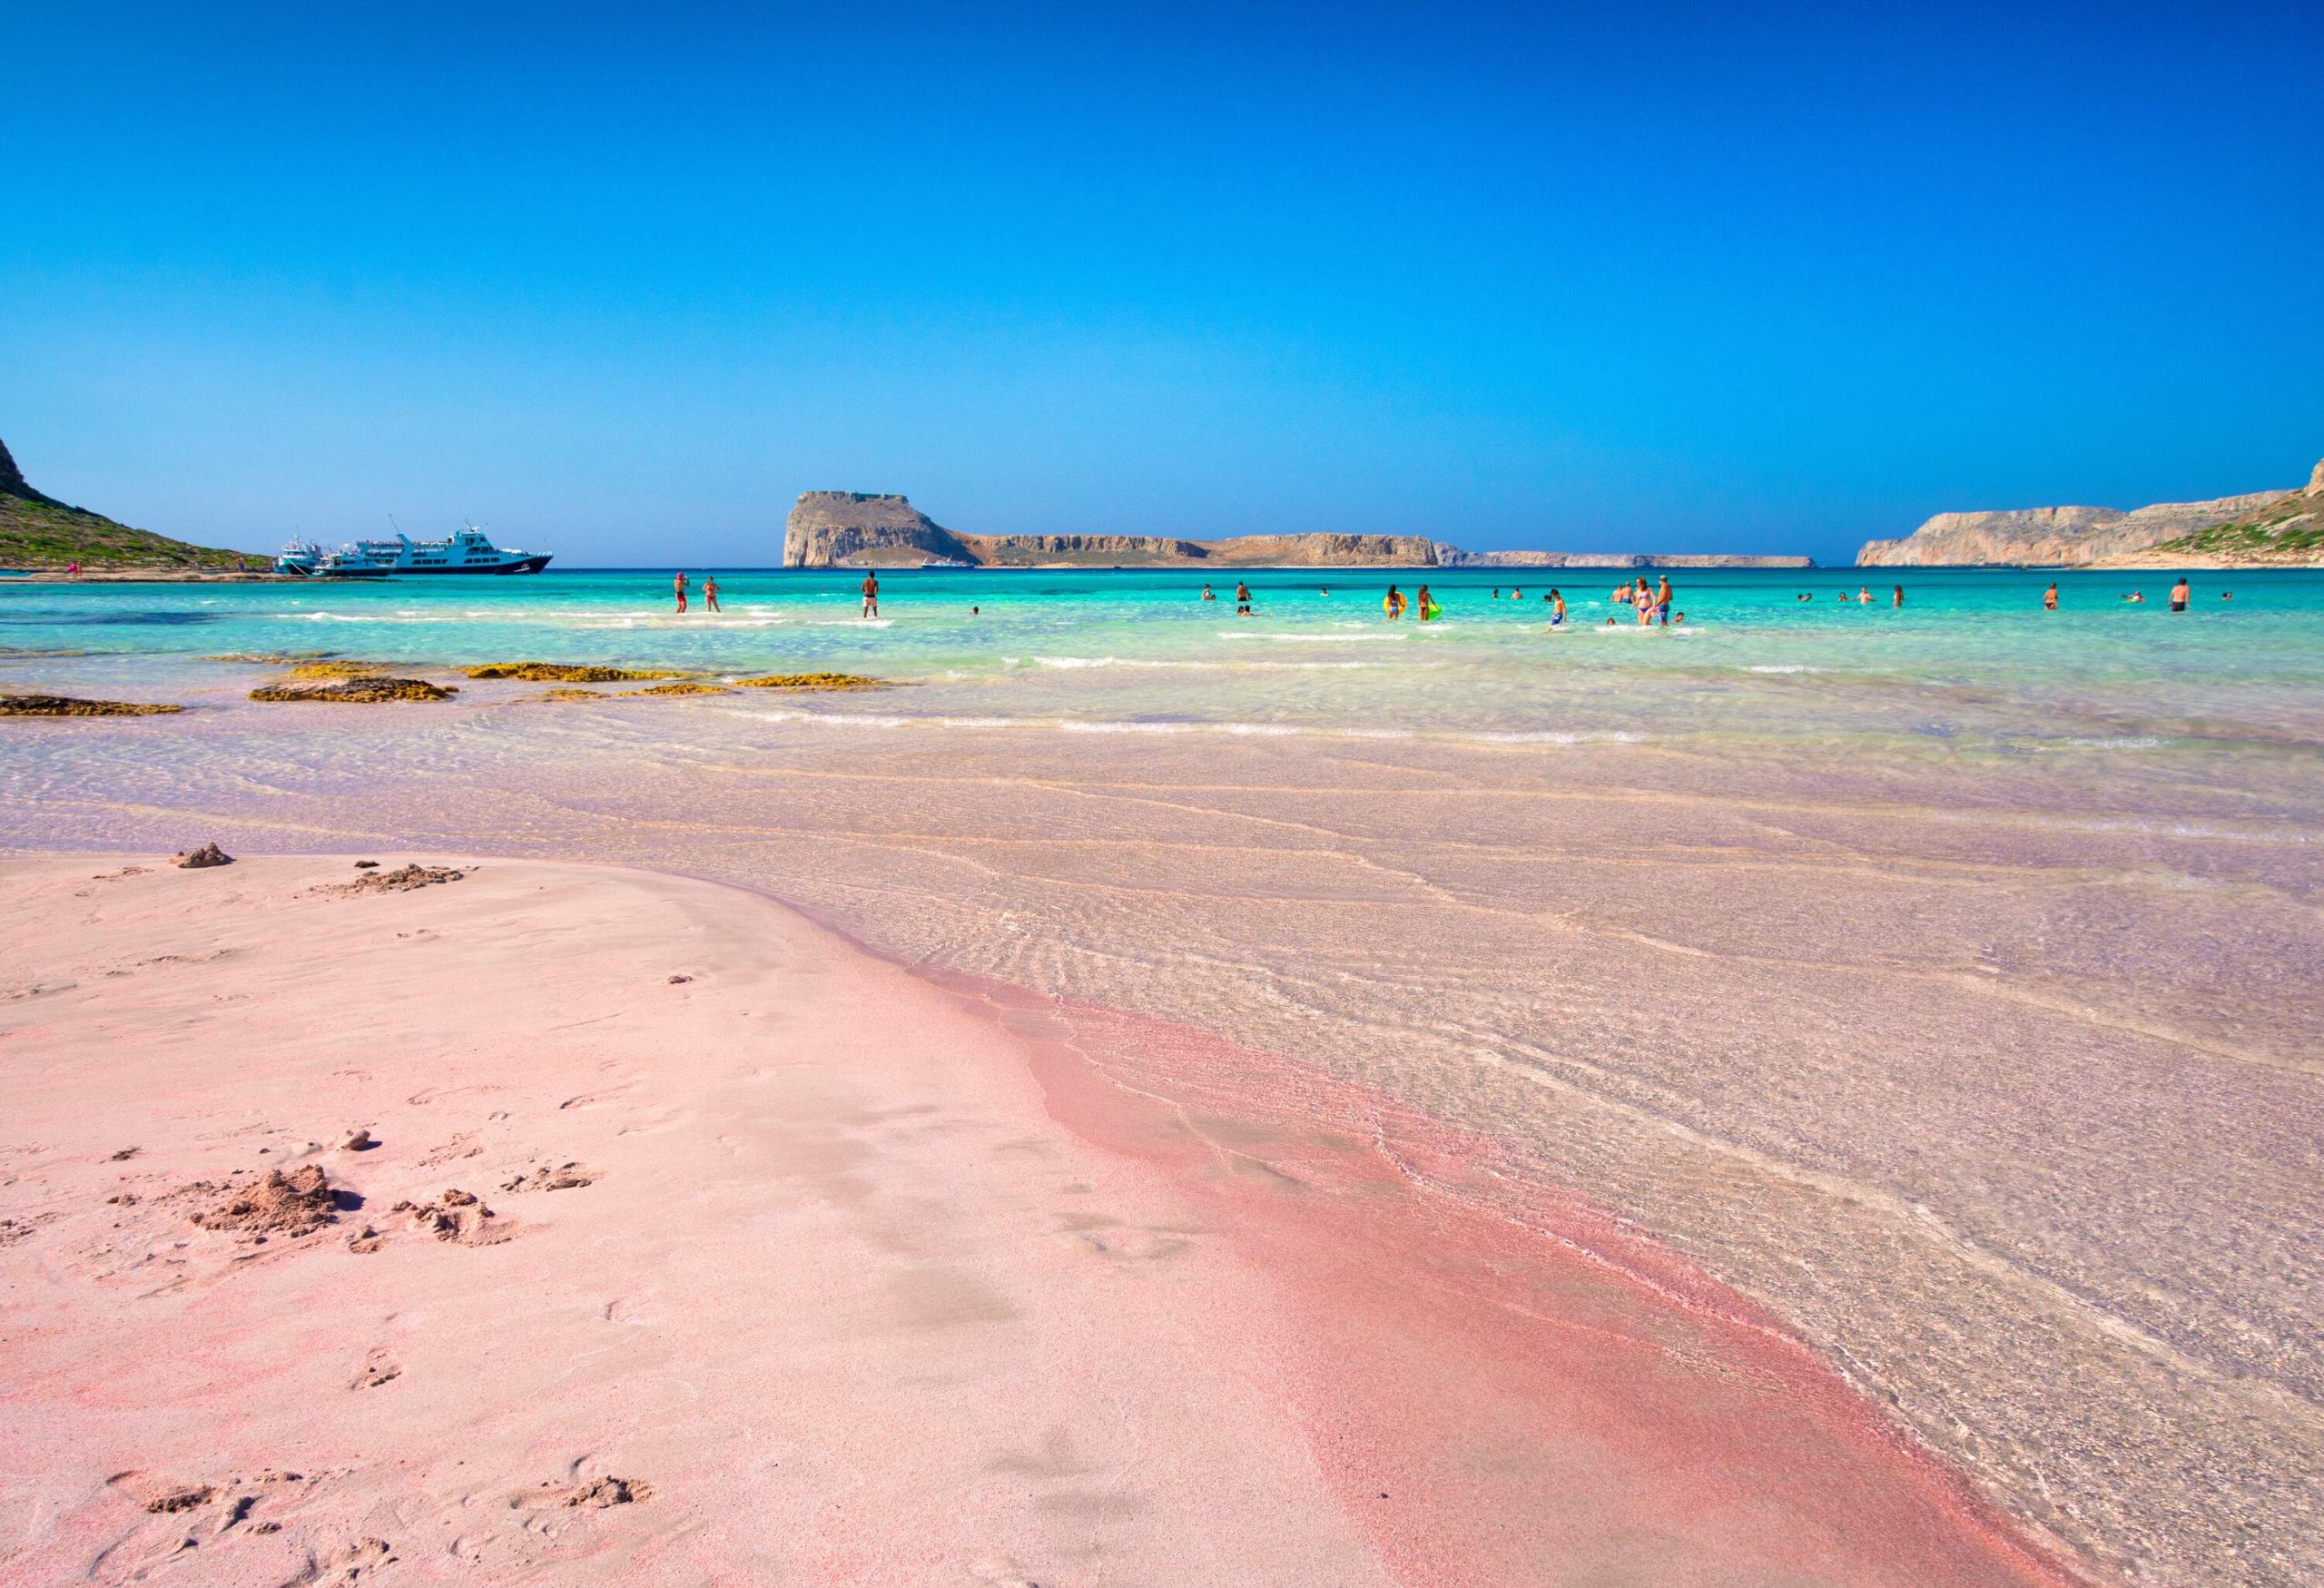 People on the turquoise water beach with a pinkish sand shore.